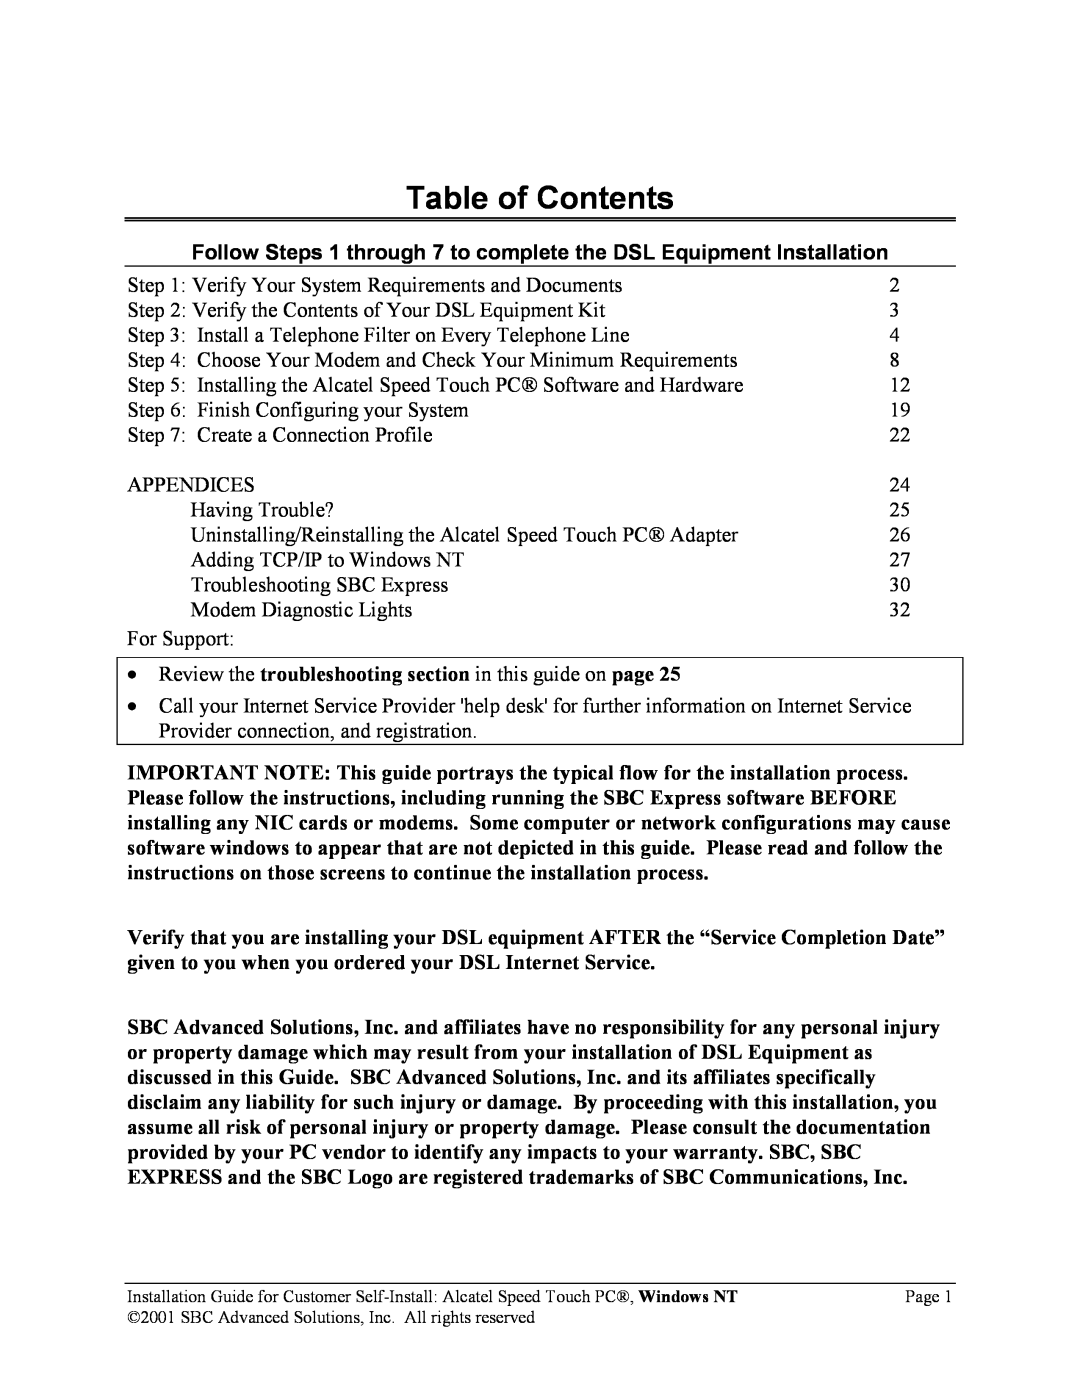 SBC comm AlcatelPCNT02A manual Table of Contents, Follow Steps 1 through 7 to complete the DSL Equipment Installation 